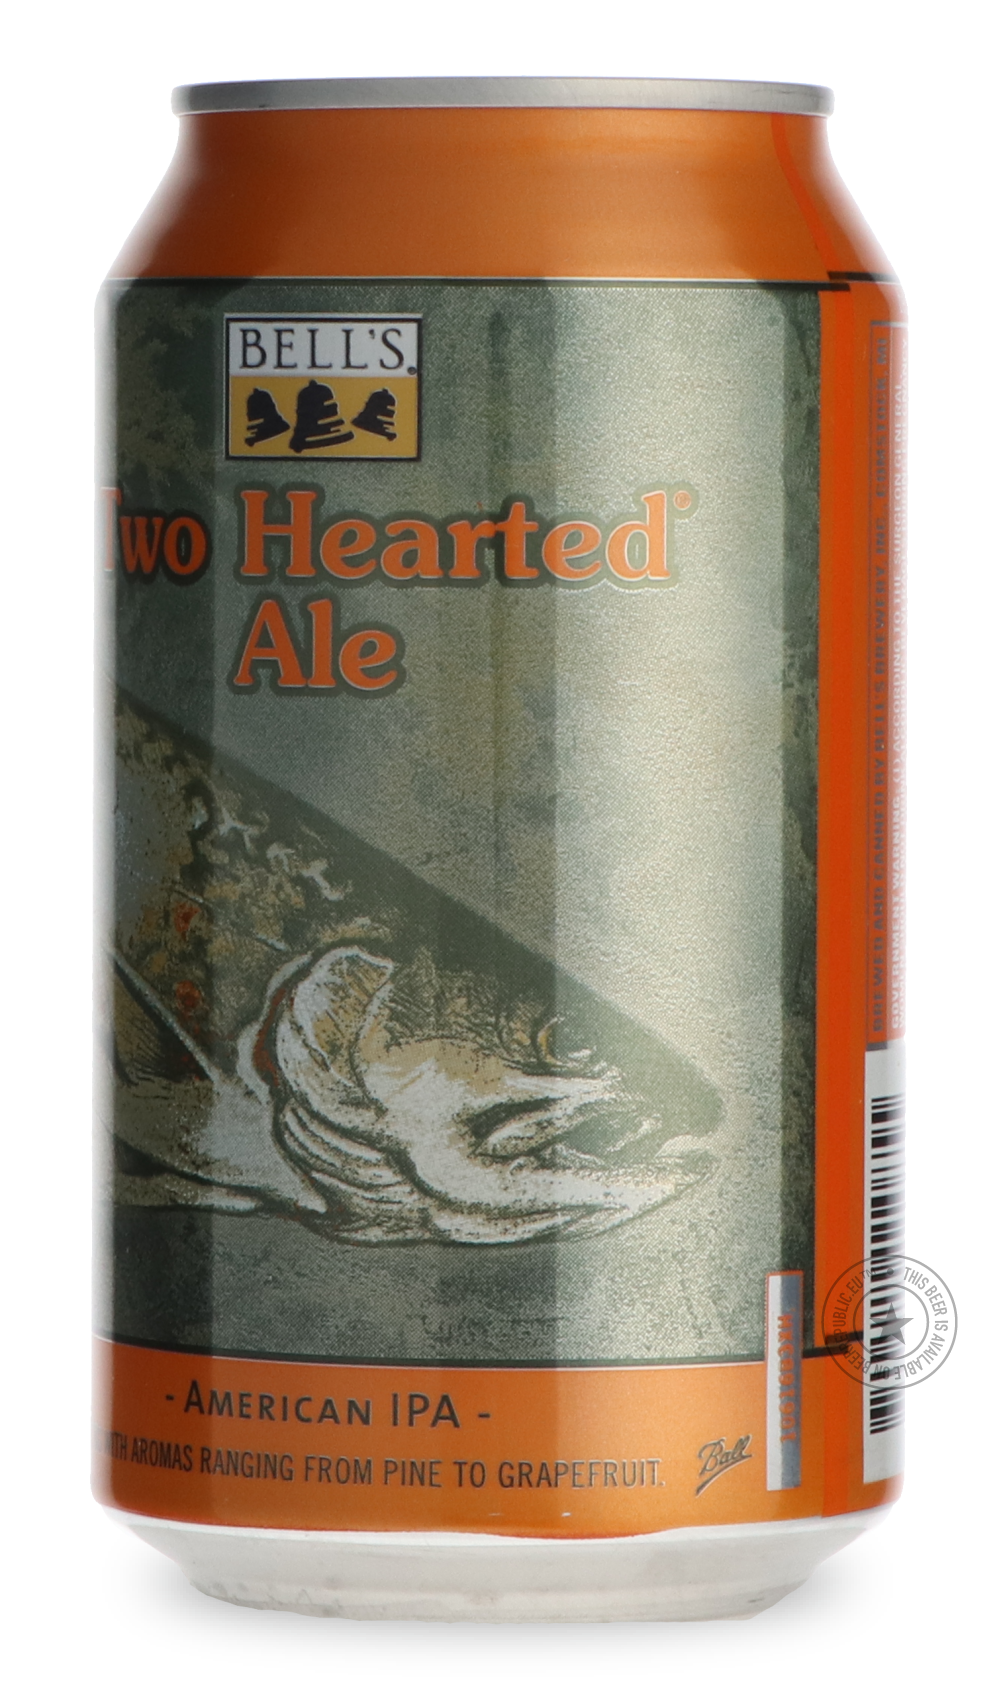 -Bell's- Two Hearted IPA-IPA- Only @ Beer Republic - The best online beer store for American & Canadian craft beer - Buy beer online from the USA and Canada - Bier online kopen - Amerikaans bier kopen - Craft beer store - Craft beer kopen - Amerikanisch bier kaufen - Bier online kaufen - Acheter biere online - IPA - Stout - Porter - New England IPA - Hazy IPA - Imperial Stout - Barrel Aged - Barrel Aged Imperial Stout - Brown - Dark beer - Blond - Blonde - Pilsner - Lager - Wheat - Weizen - Amber - Barley W